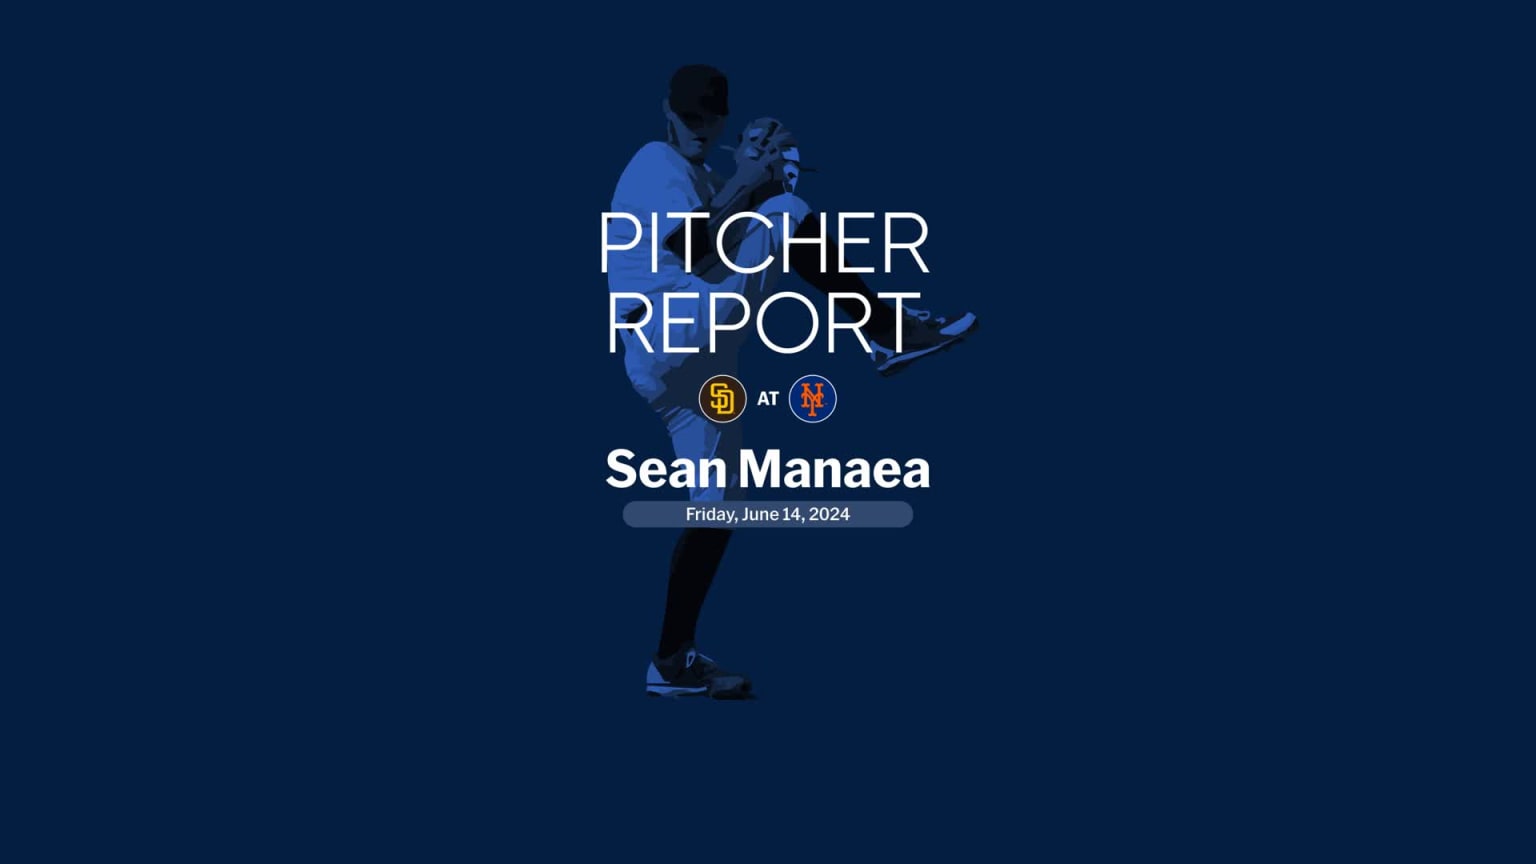 Sean Manaea's outing against the Padres 06/14/2024 New York Mets